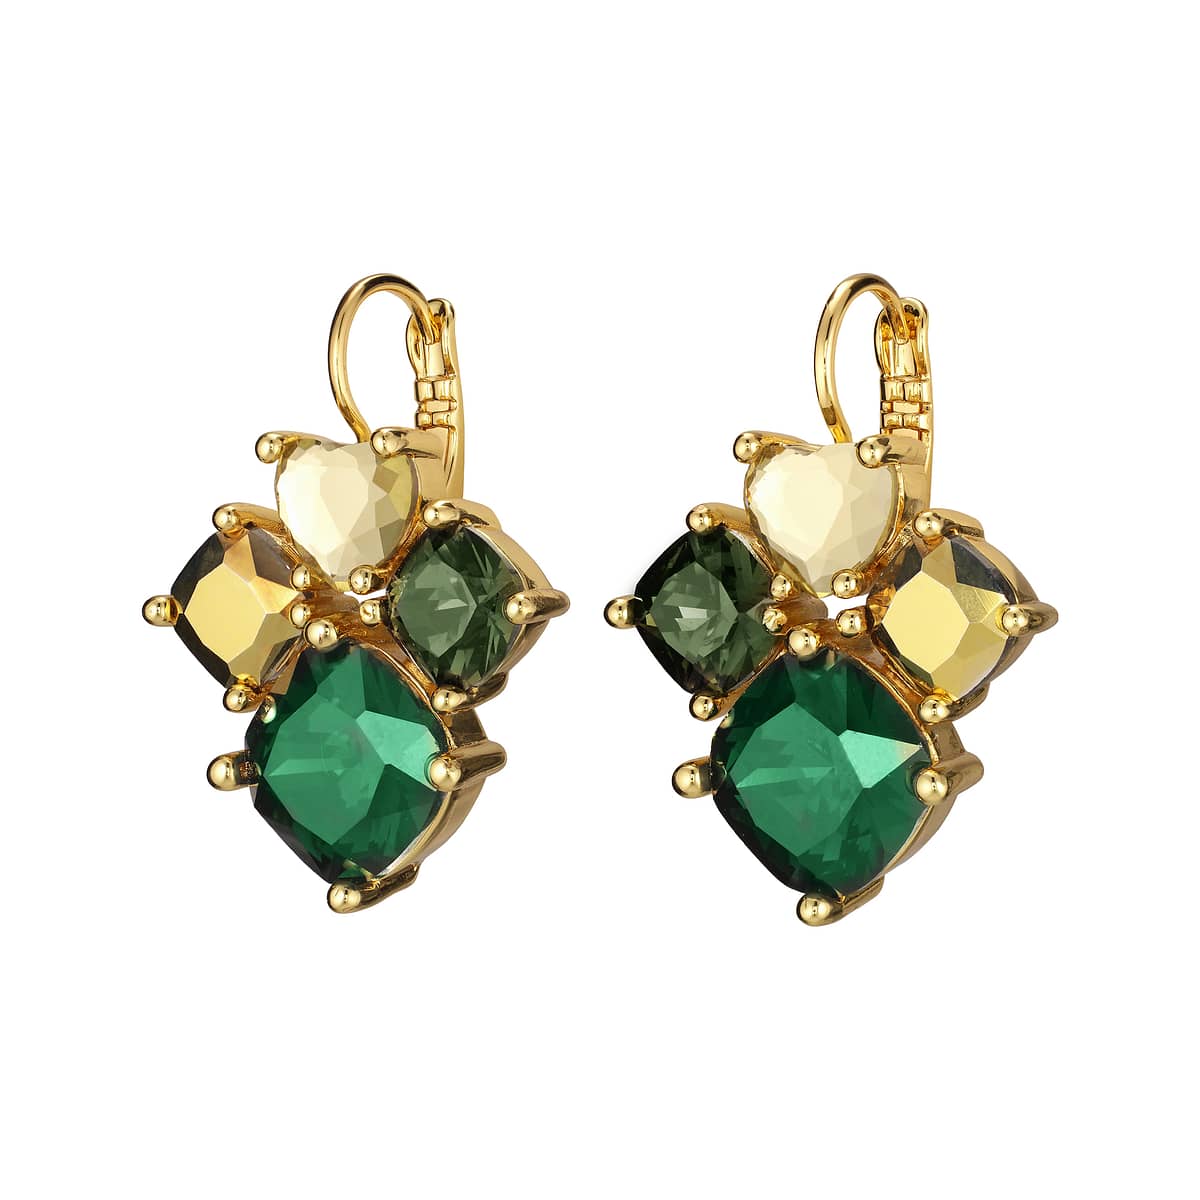 MARA - is a a fantastic crystal chandelier earring handmade with several handset crystals on a prongset backdrop - French hook is made in surgical steel. Body made in plated and polished brass. Here shown in an emerald green and golden mix finish. Nickel free Danish design.